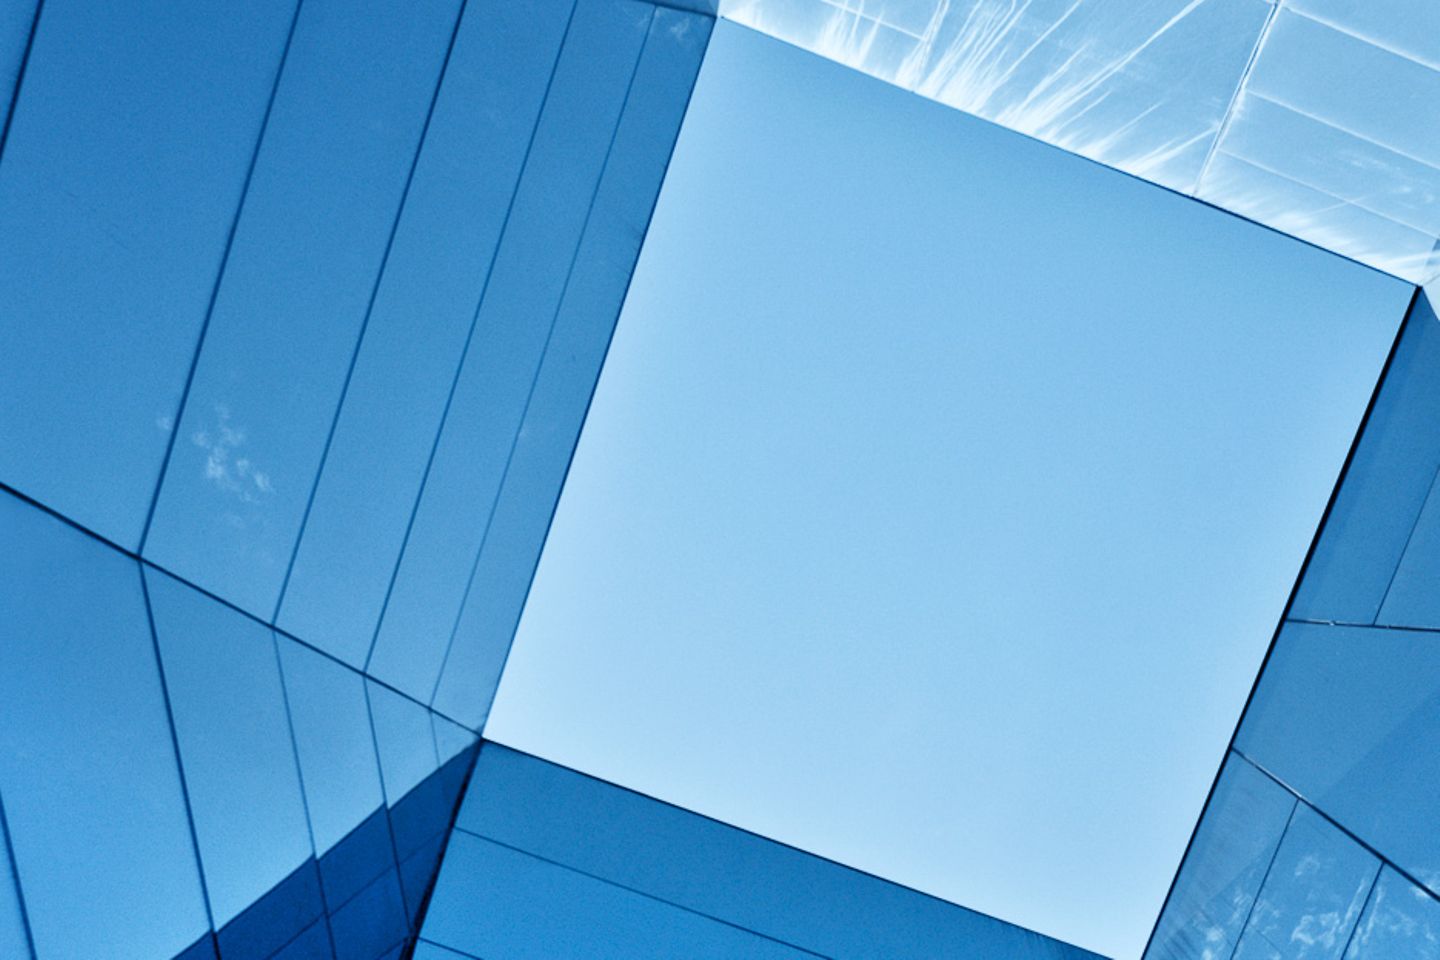 Vertical view of the sky through a glass prism.